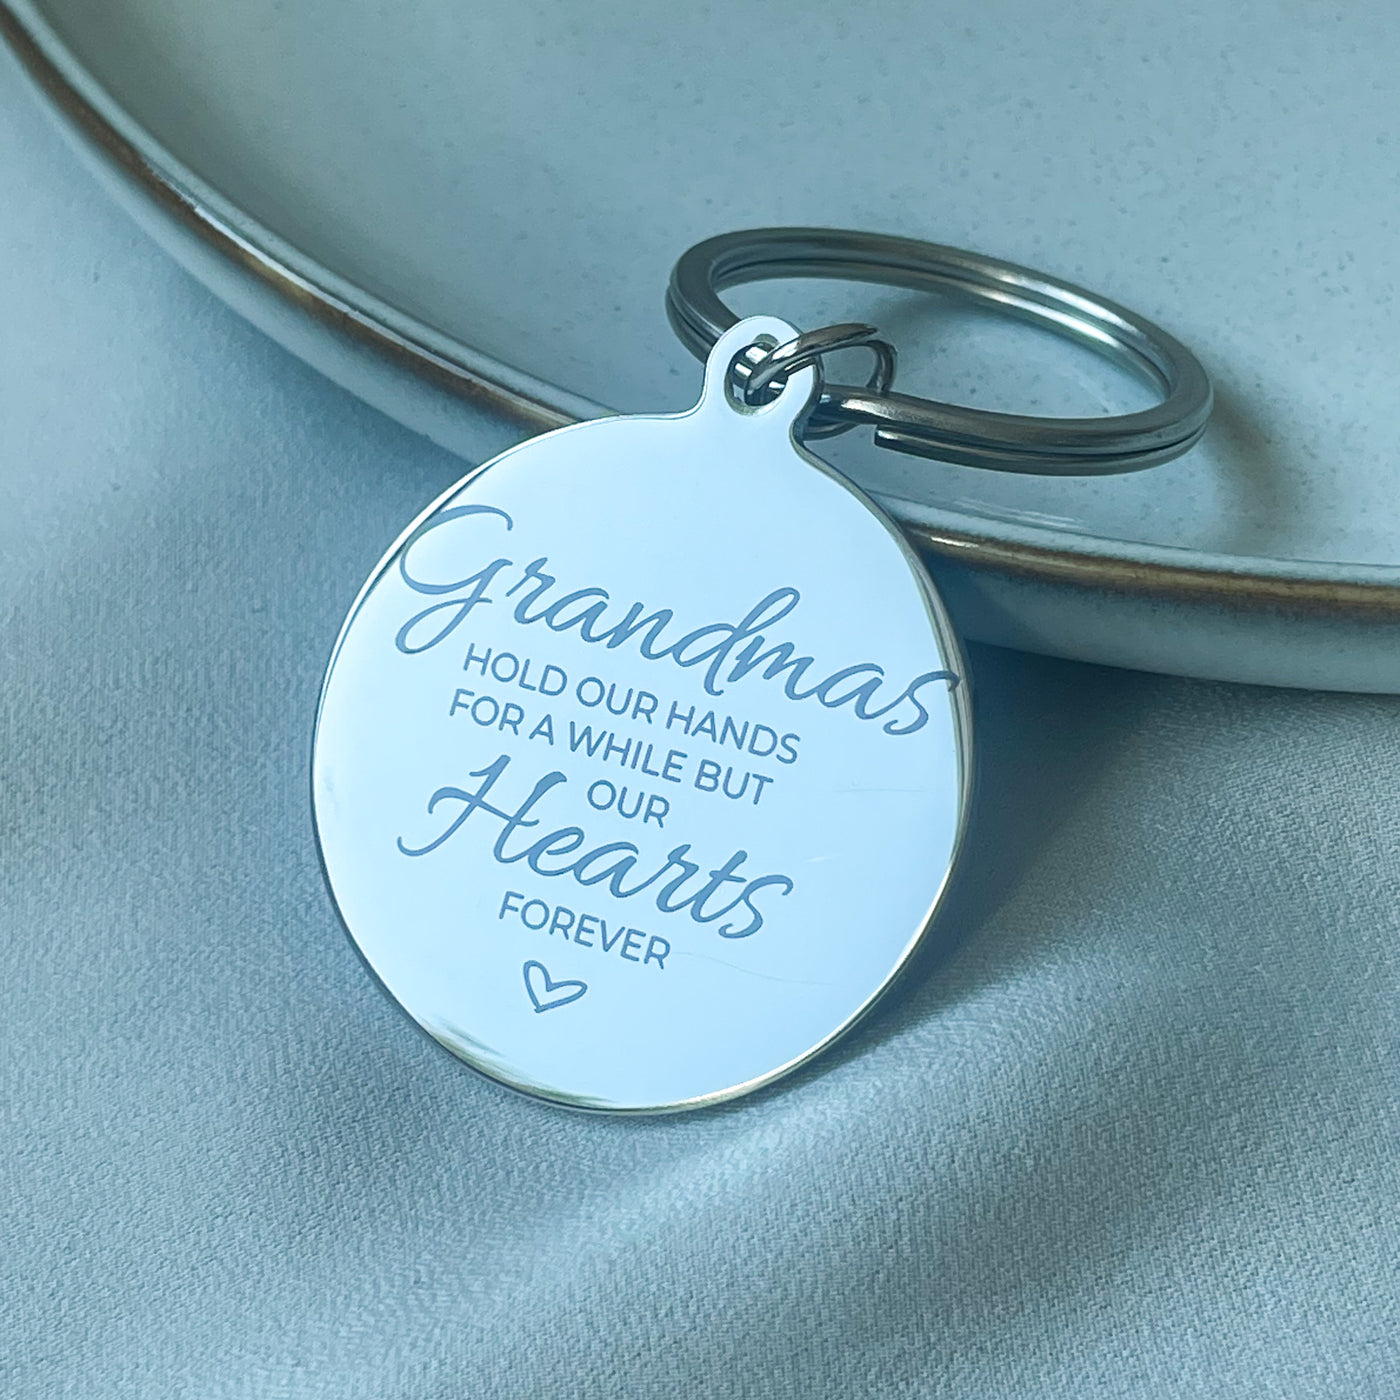 KEYCHAIN - "GRANDMAS HOLD OUR HANDS""